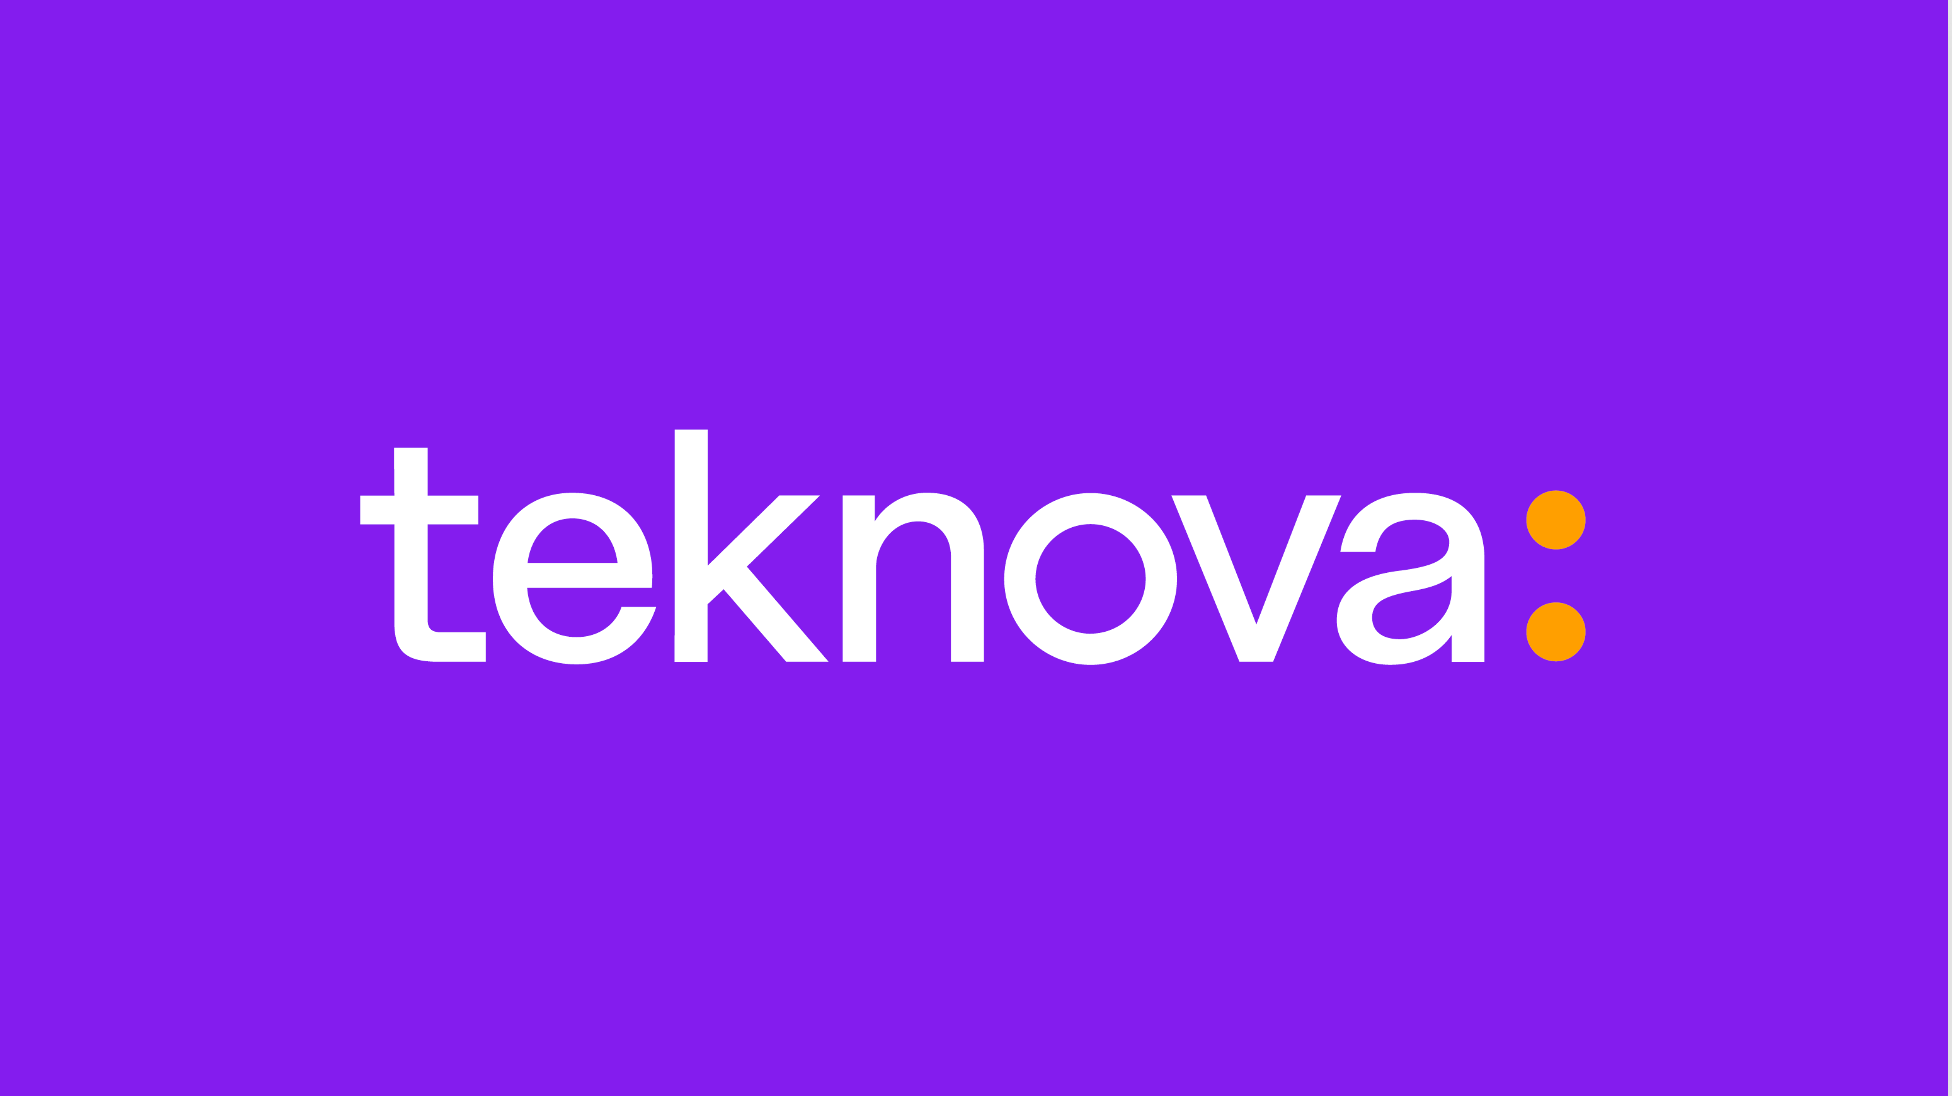 Teknova Announces Opening of New GMP-Certified Facility, Increasing Manufacturing Capacity for Custom, High-Quality Life Sciences Reagents 176